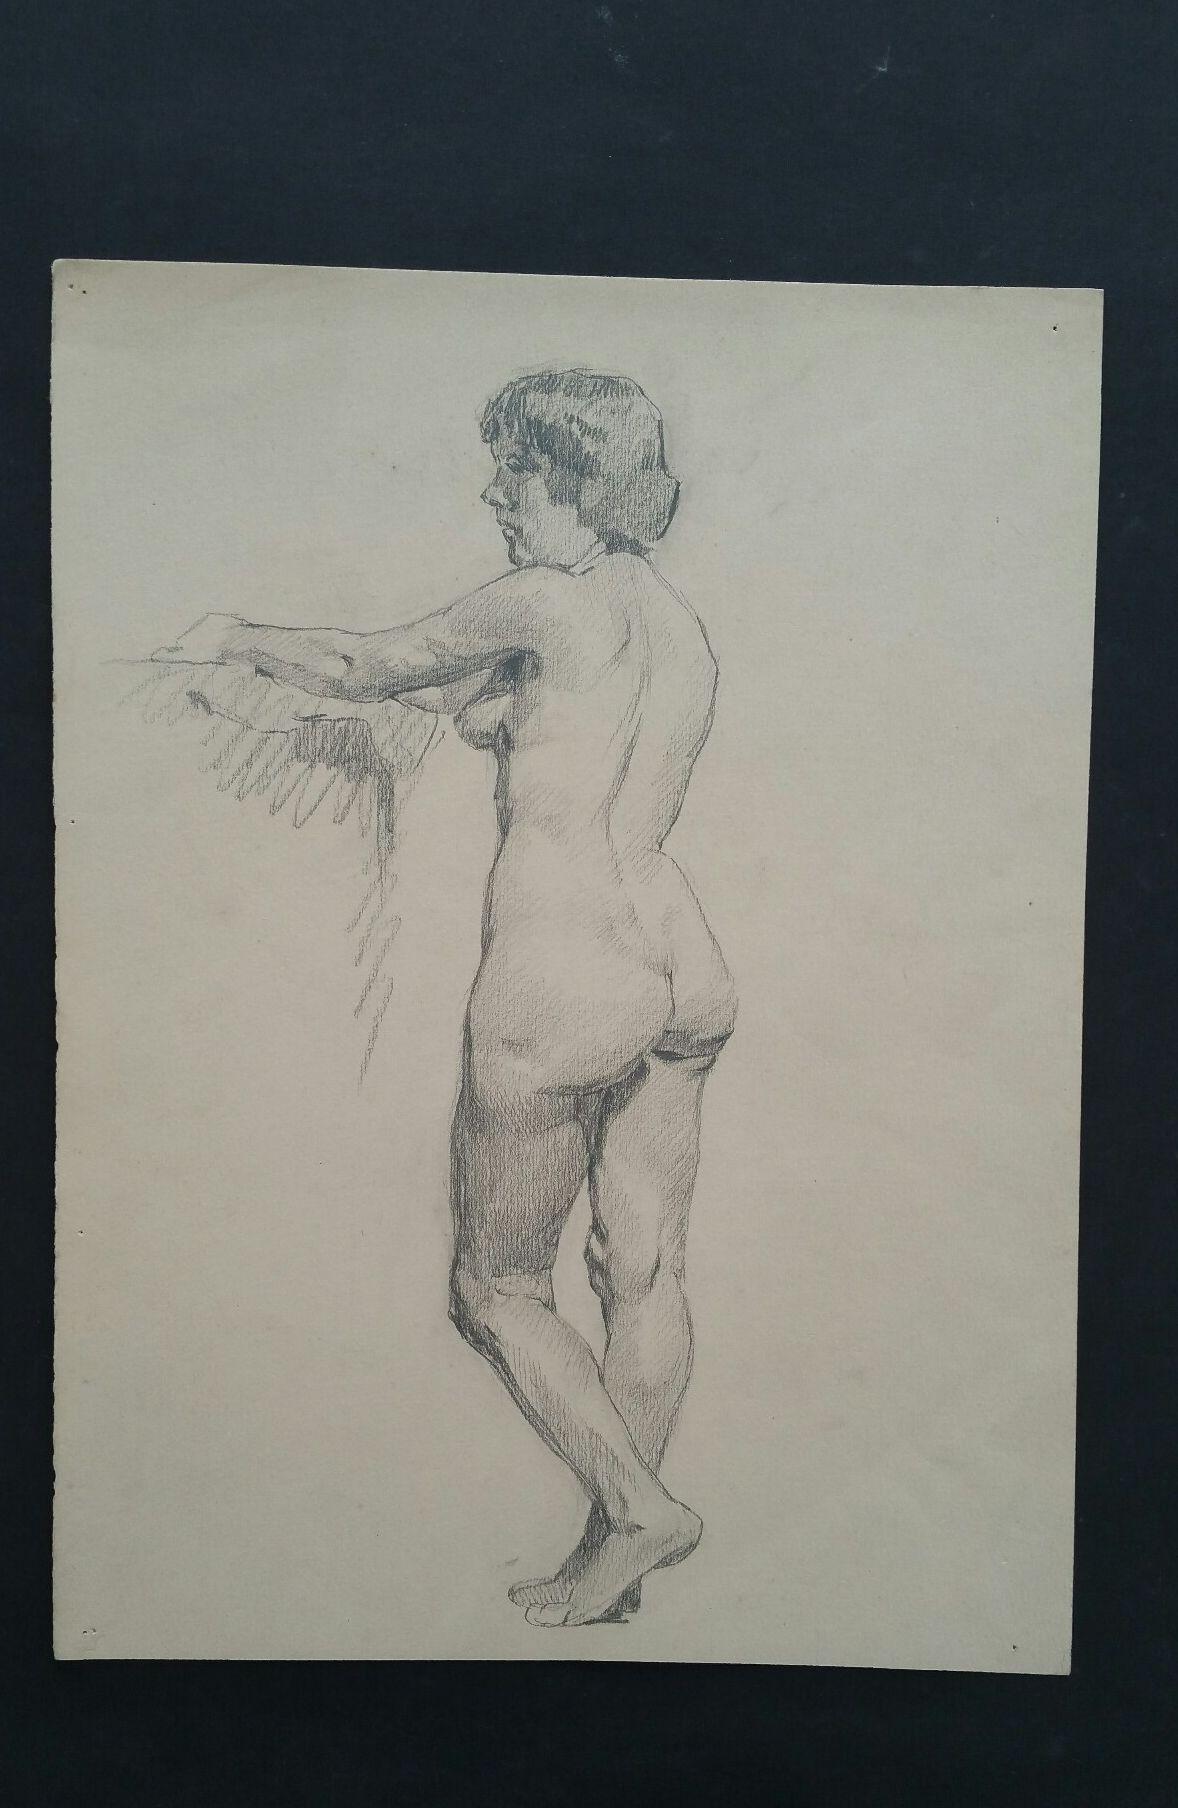 English Graphite Sketch of a Female Nude, Standing
by Henry George Moon (British 1857-1905)
on off-white artists paper, unframed
measurements: sheet 14.5 x 11 inches 

provenance: from the artists estate

Condition report: pin holes to